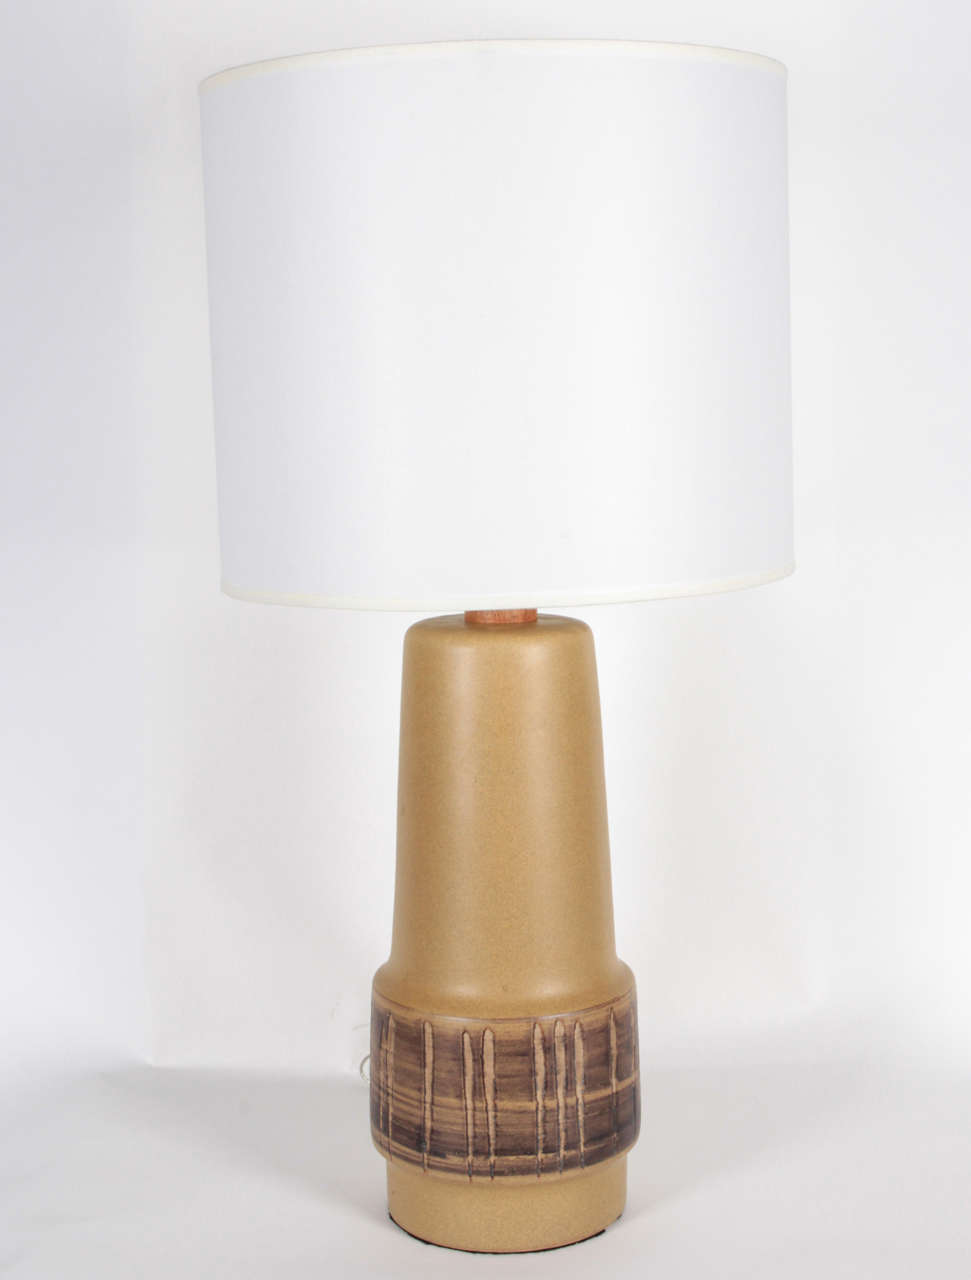 Mint condition pair of tan glazed ceramic lamps with a contrasting glazed band by Gordon Martz. New wiring and sockets.